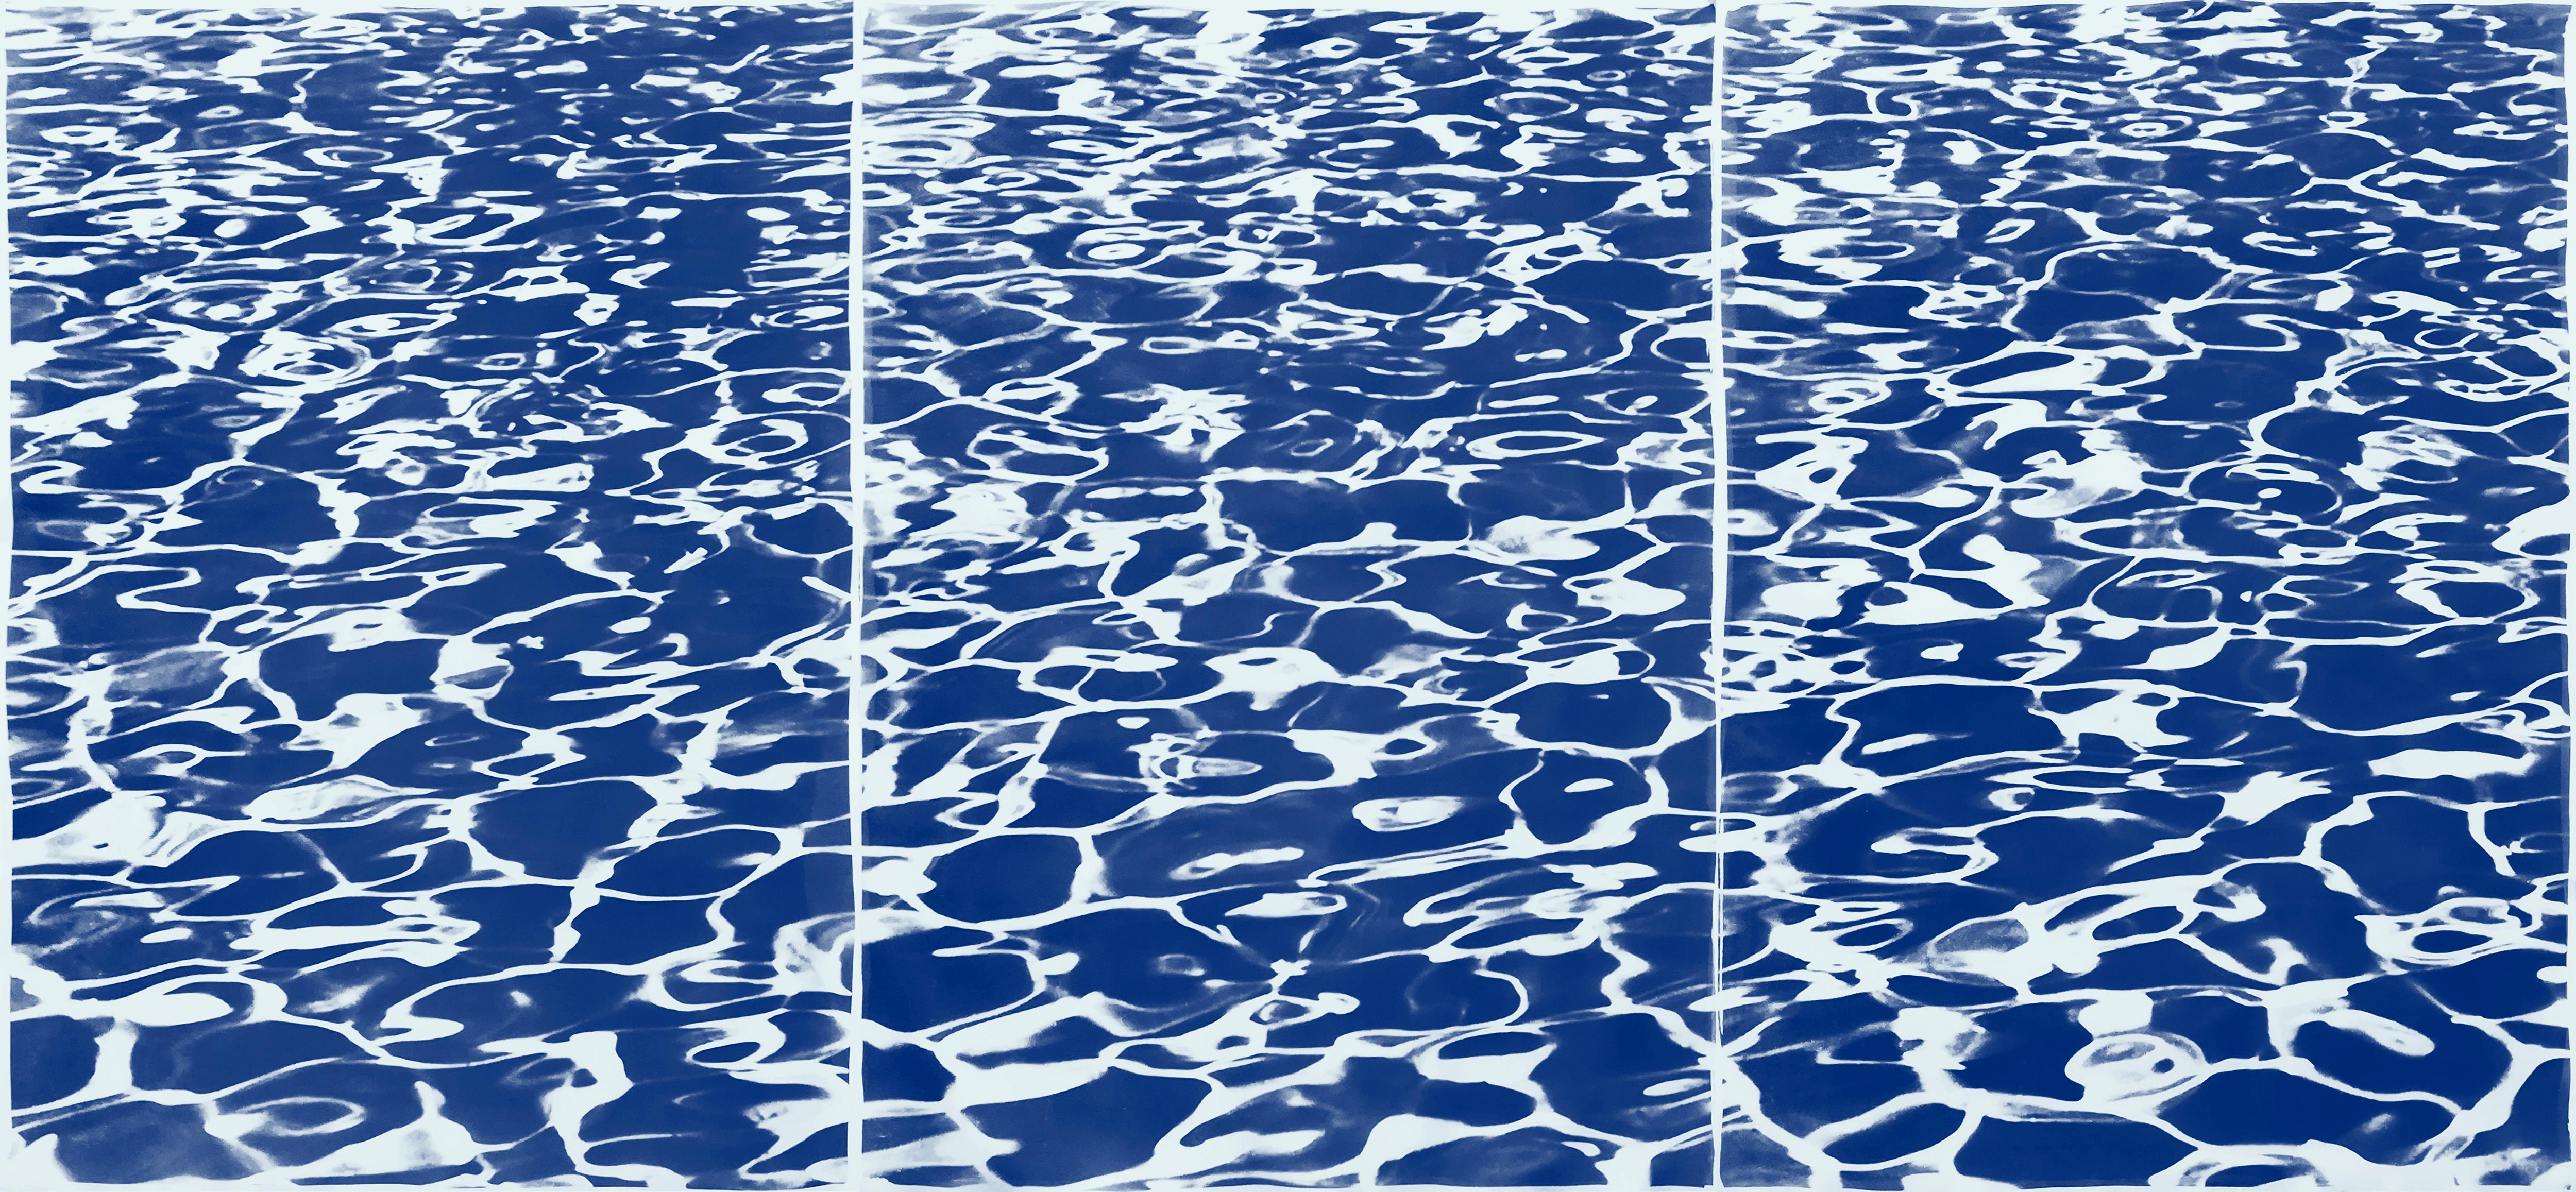 Pool Patterns, Nautical Abstract Seascape Triptych, Blue Cyanotype Print